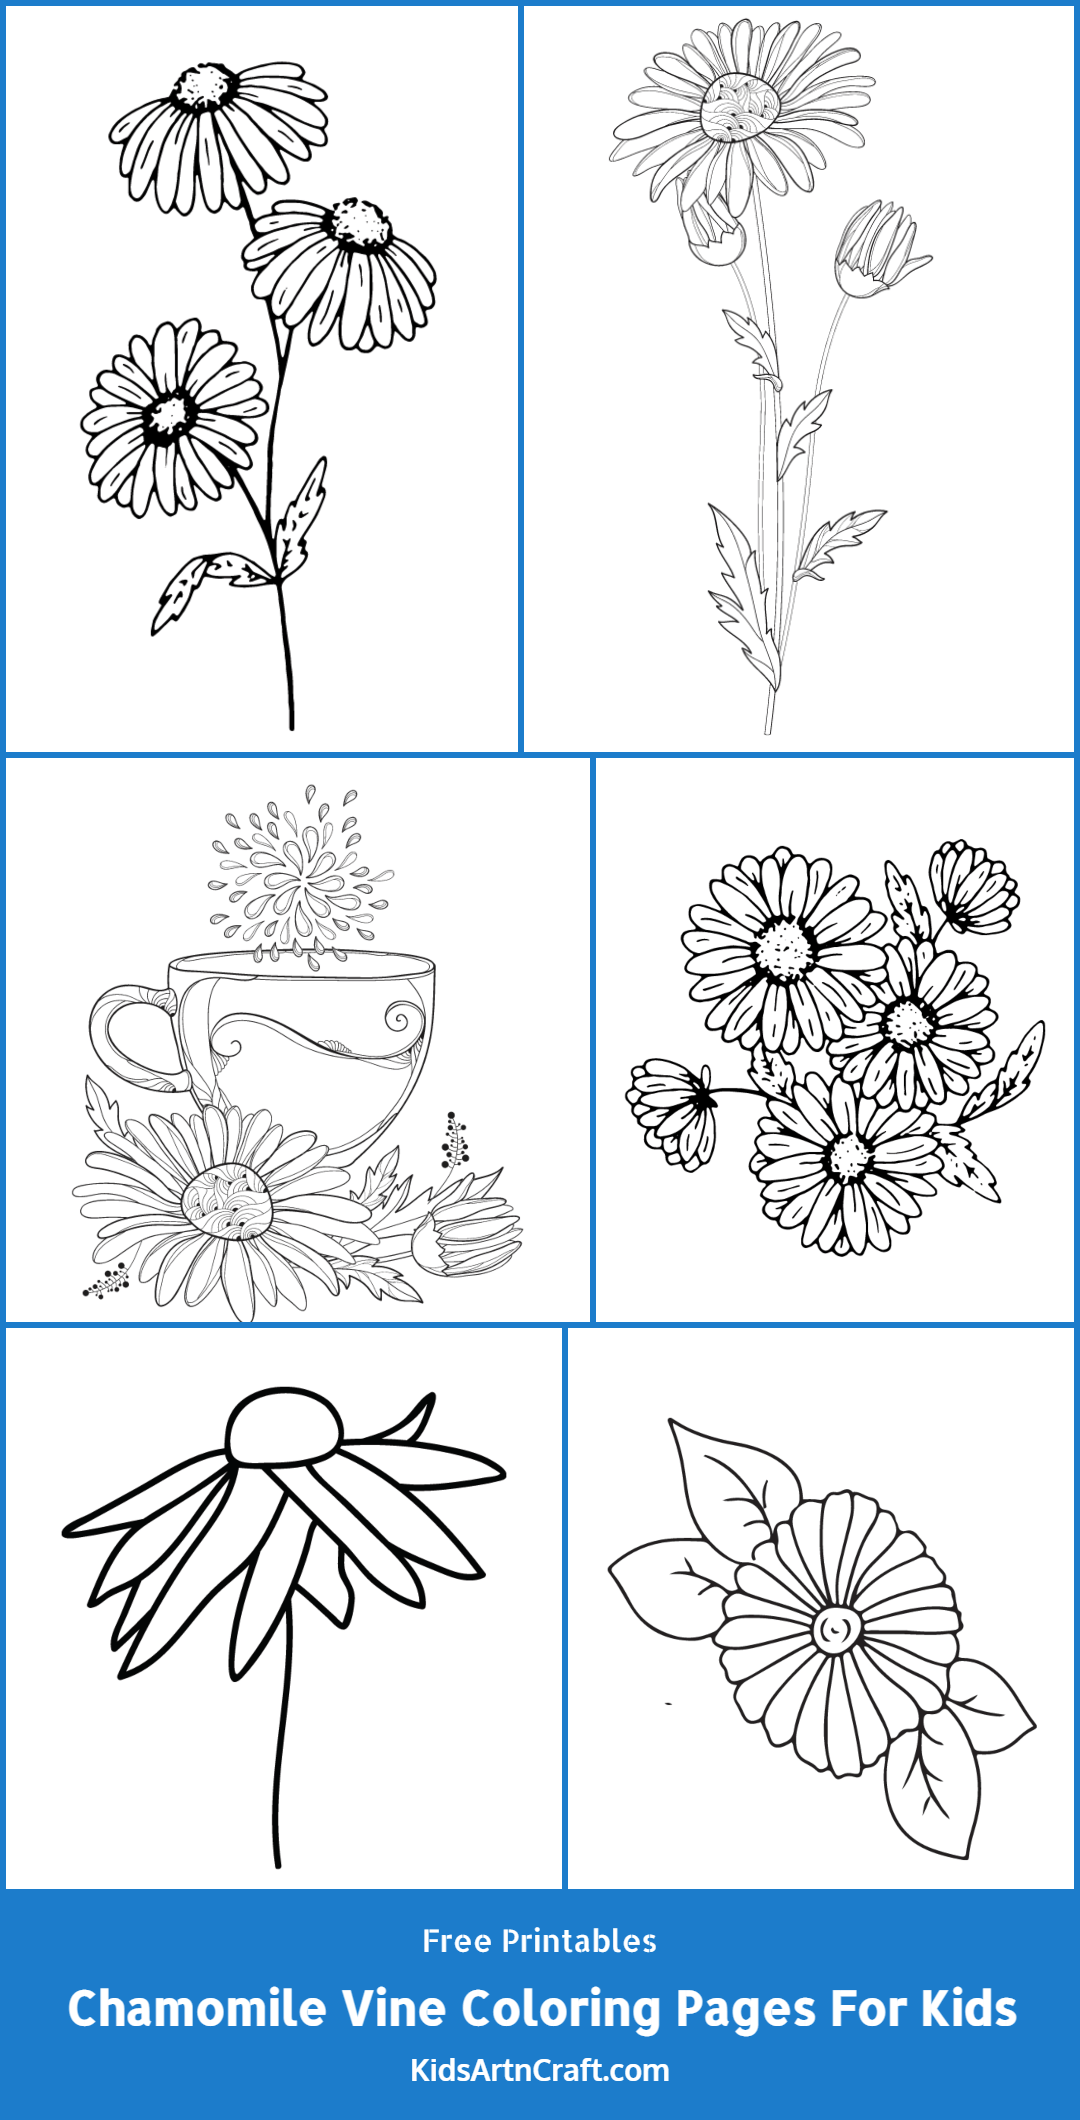 Chamomile Vine Coloring Pages For Kids – Free Printables